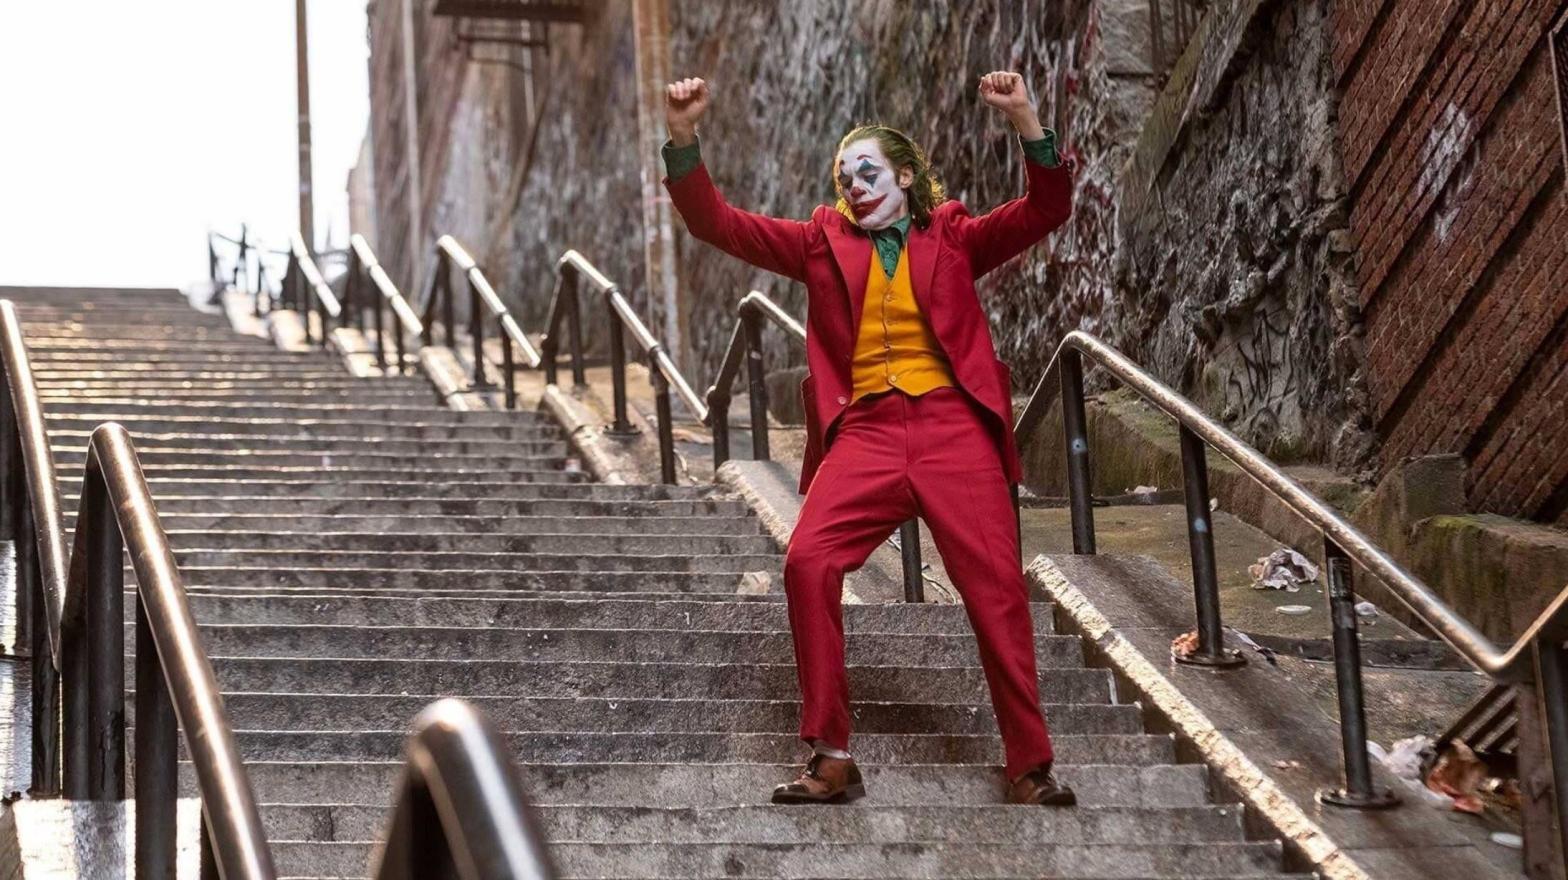 Time to dance down the steps again, Joker 2 is in the works.  (Image: Warner Bros.)